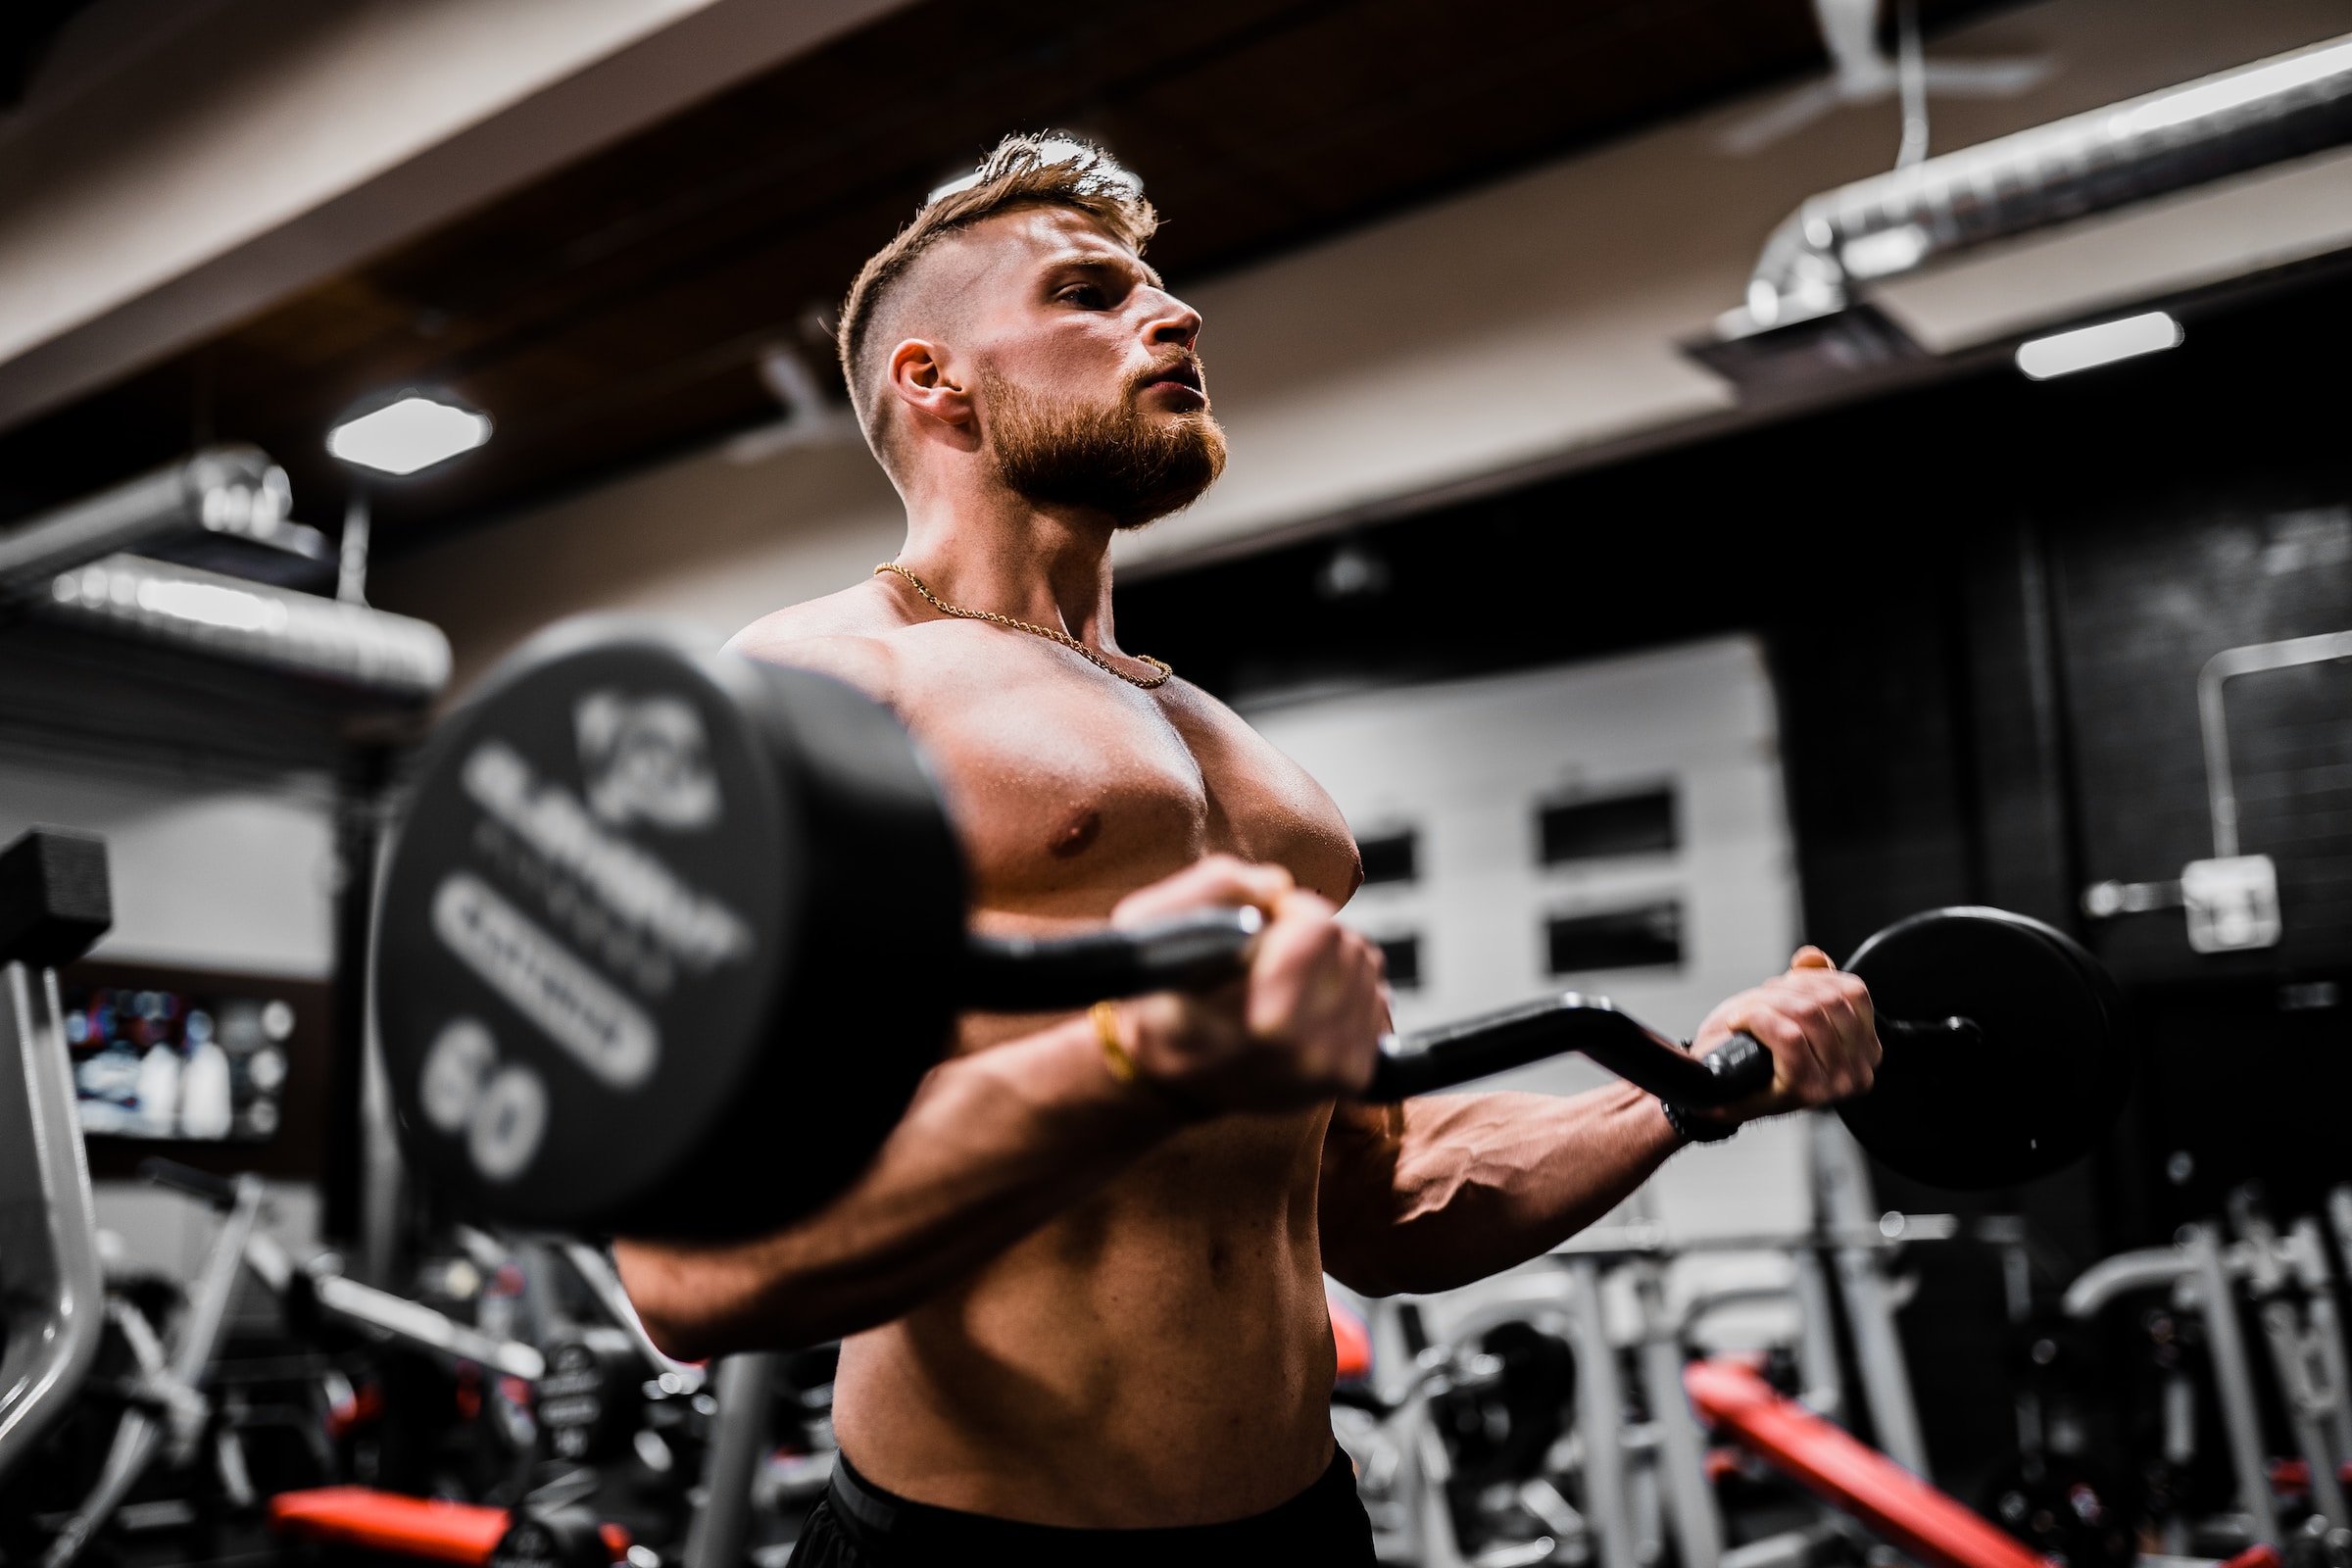 man working out lifting weights strength training shirtless in gym